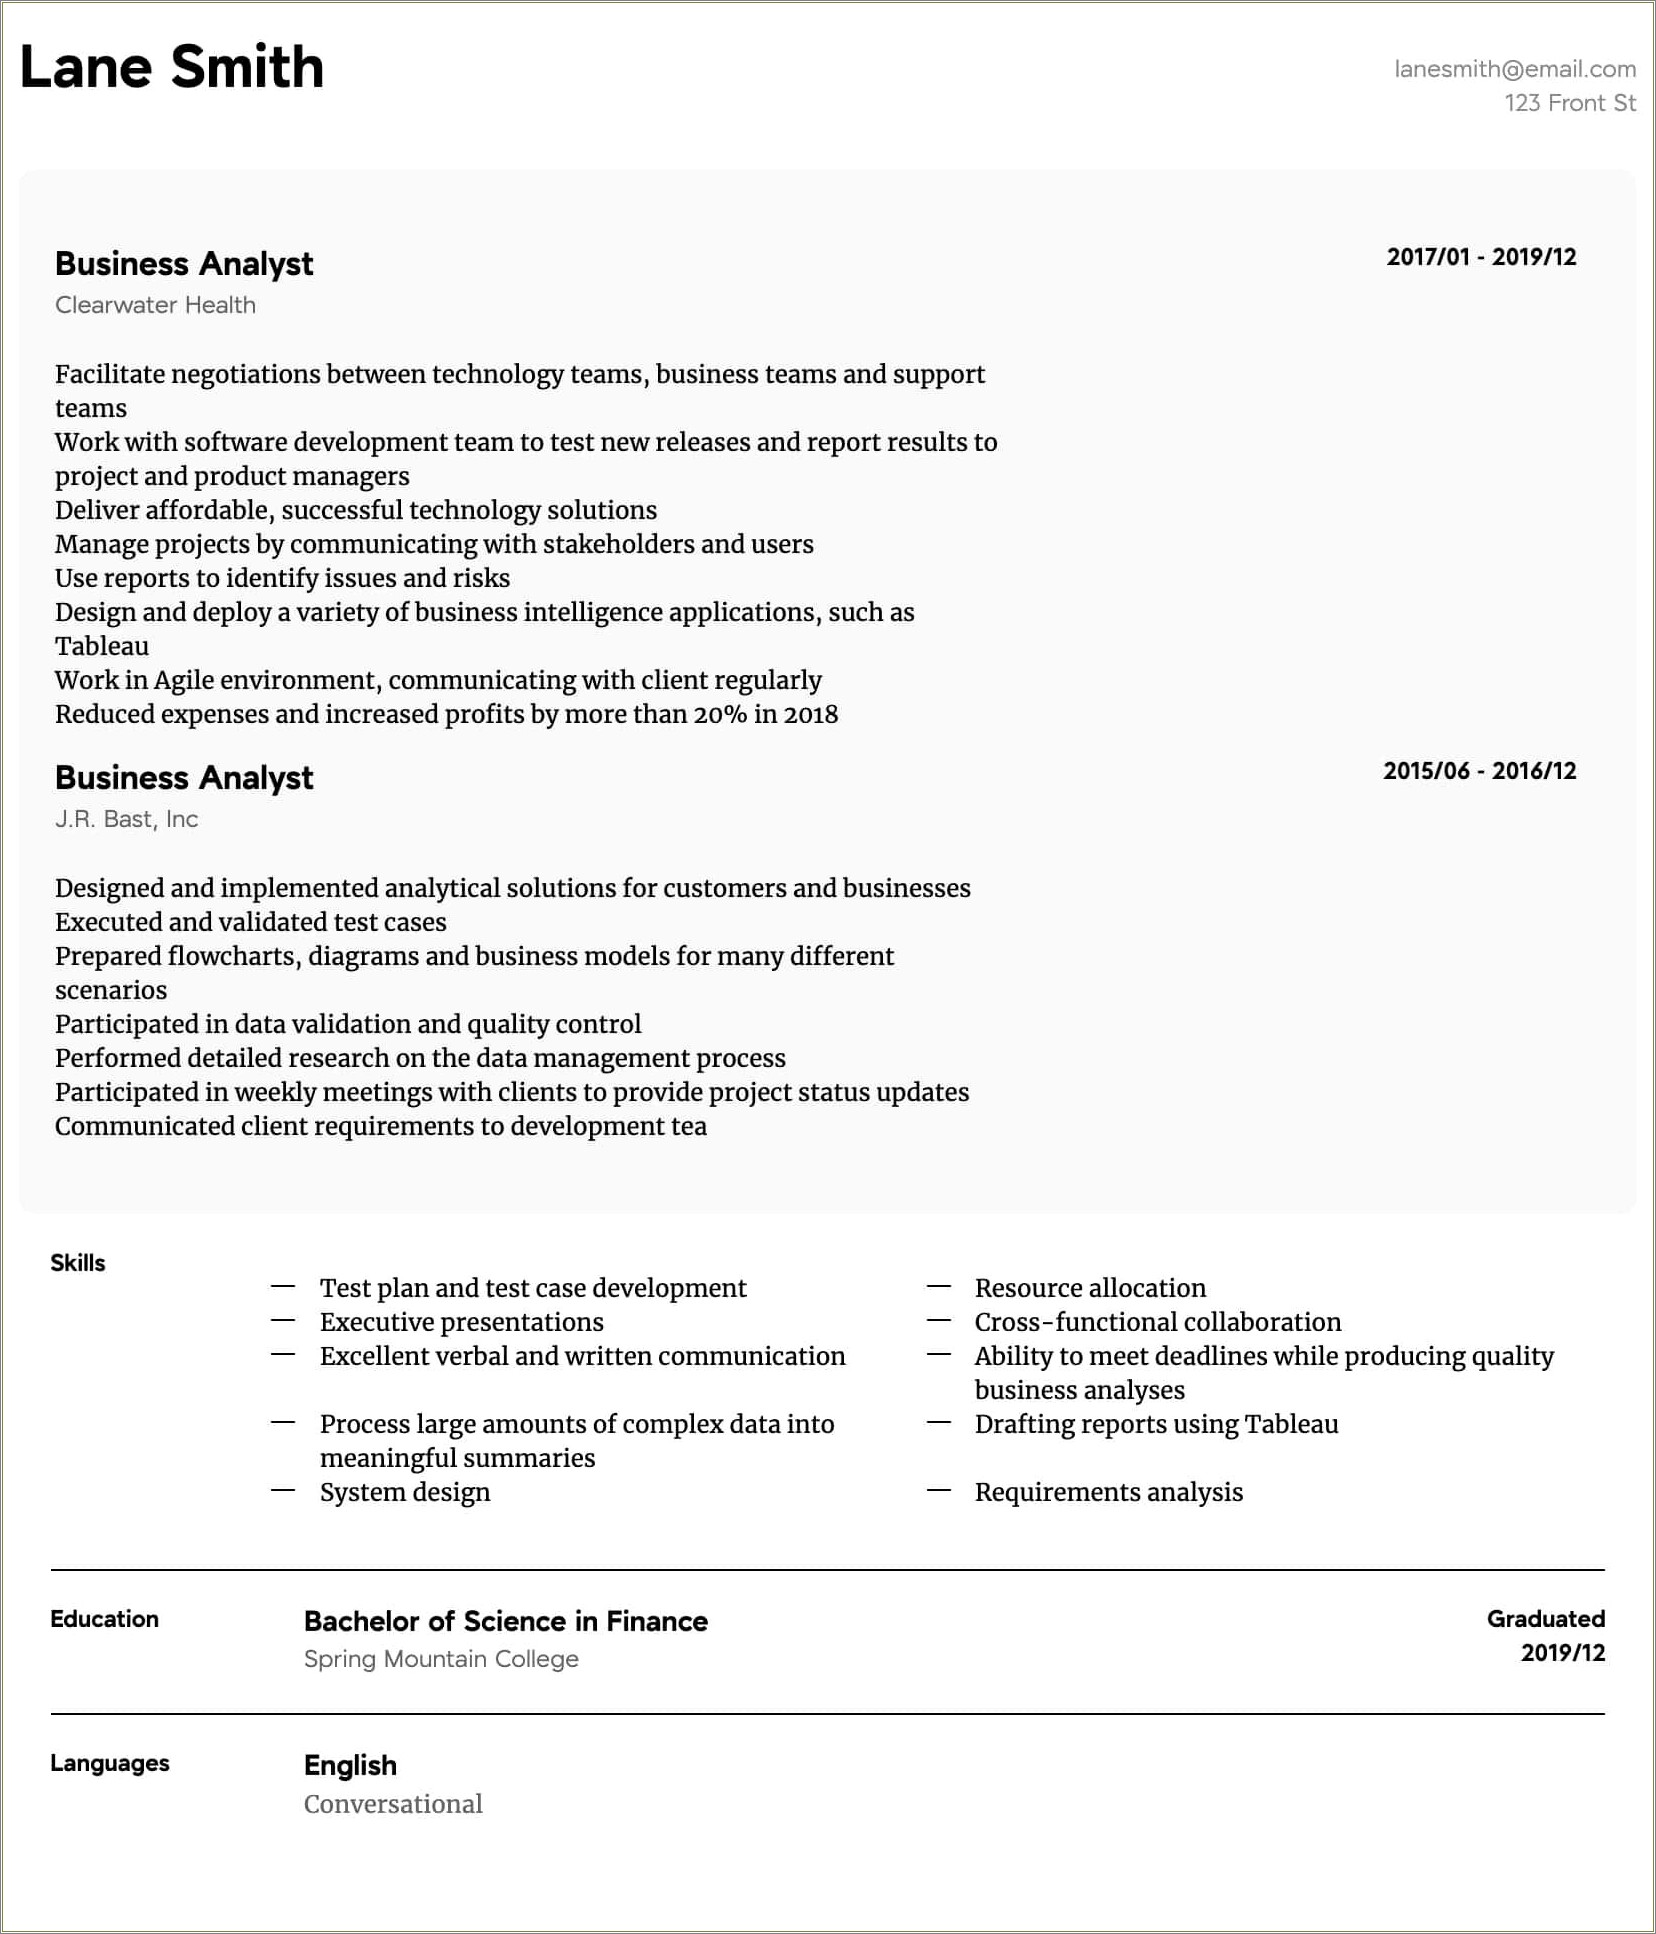 Resume Of Business Analyst With Experience